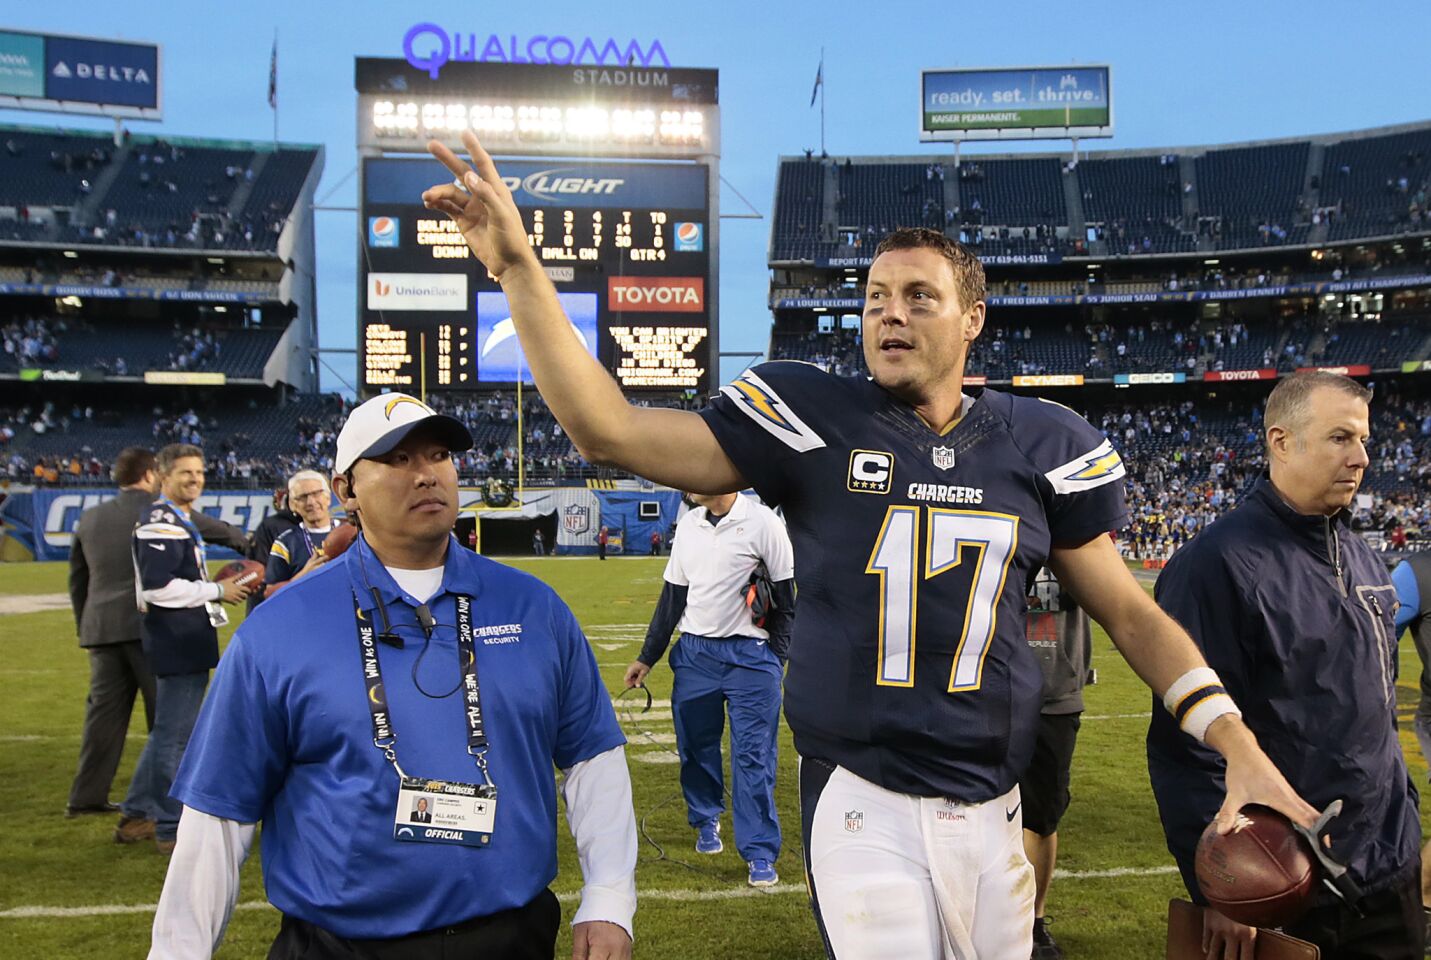 Chargers quarterback Philip Rivers waves to fans as he leaves the field after a 30-14 win over the Dolphins at Qualcomm Stadium on Sunday.